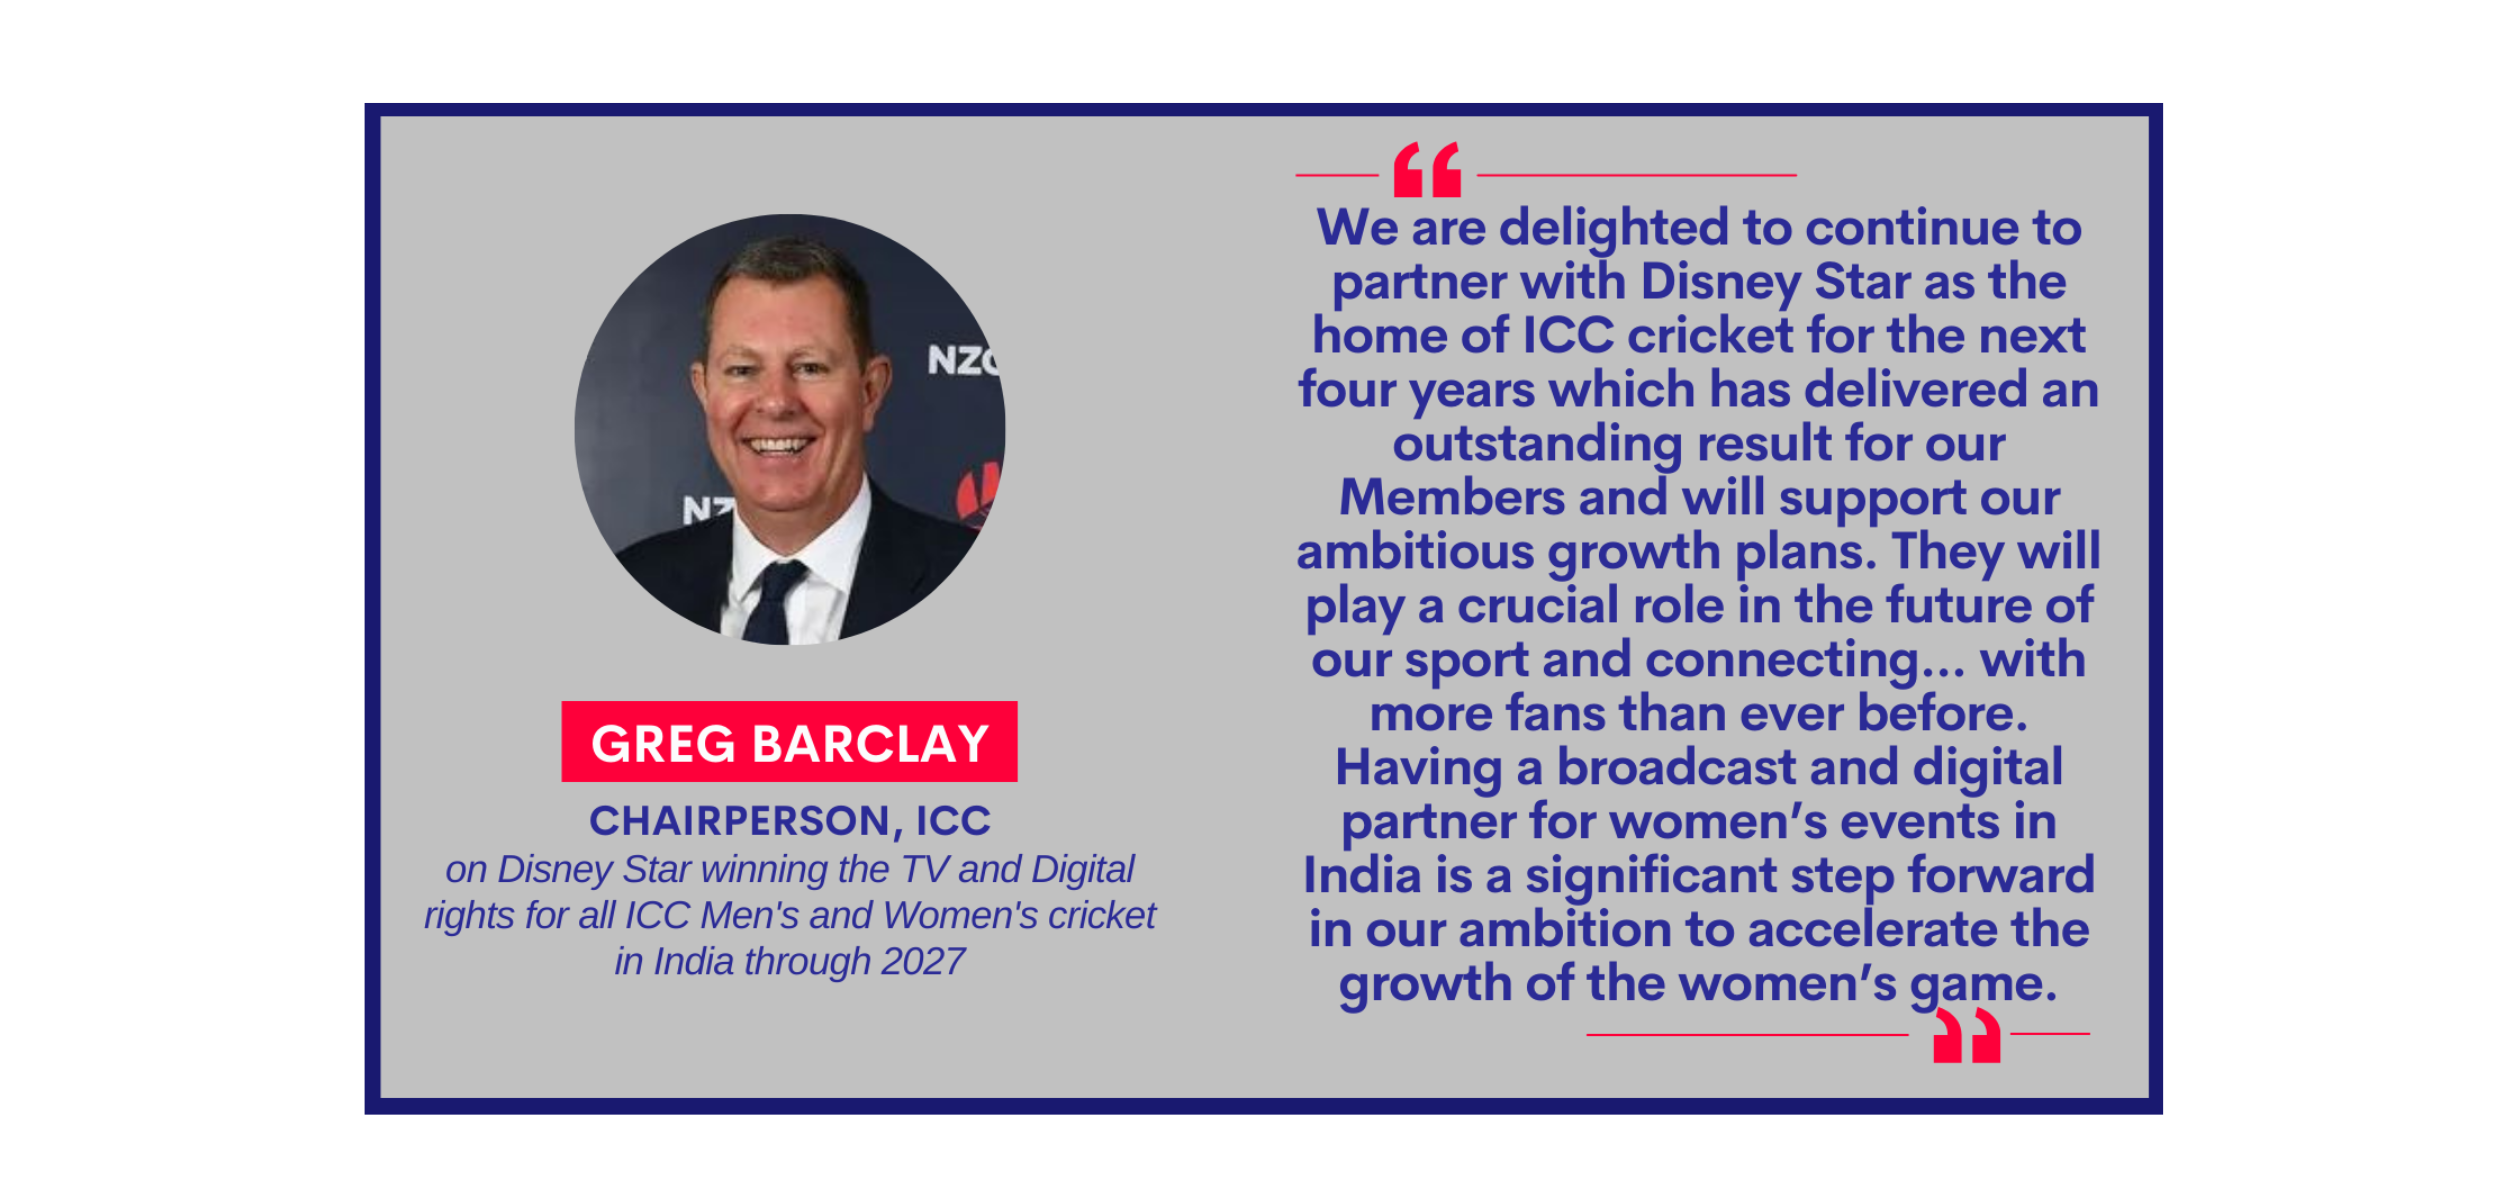 Greg Barclay, Chairperson, ICC on Disney Star winning the TV and Digital rights for all ICC Men's and Women's cricket in India through 2027